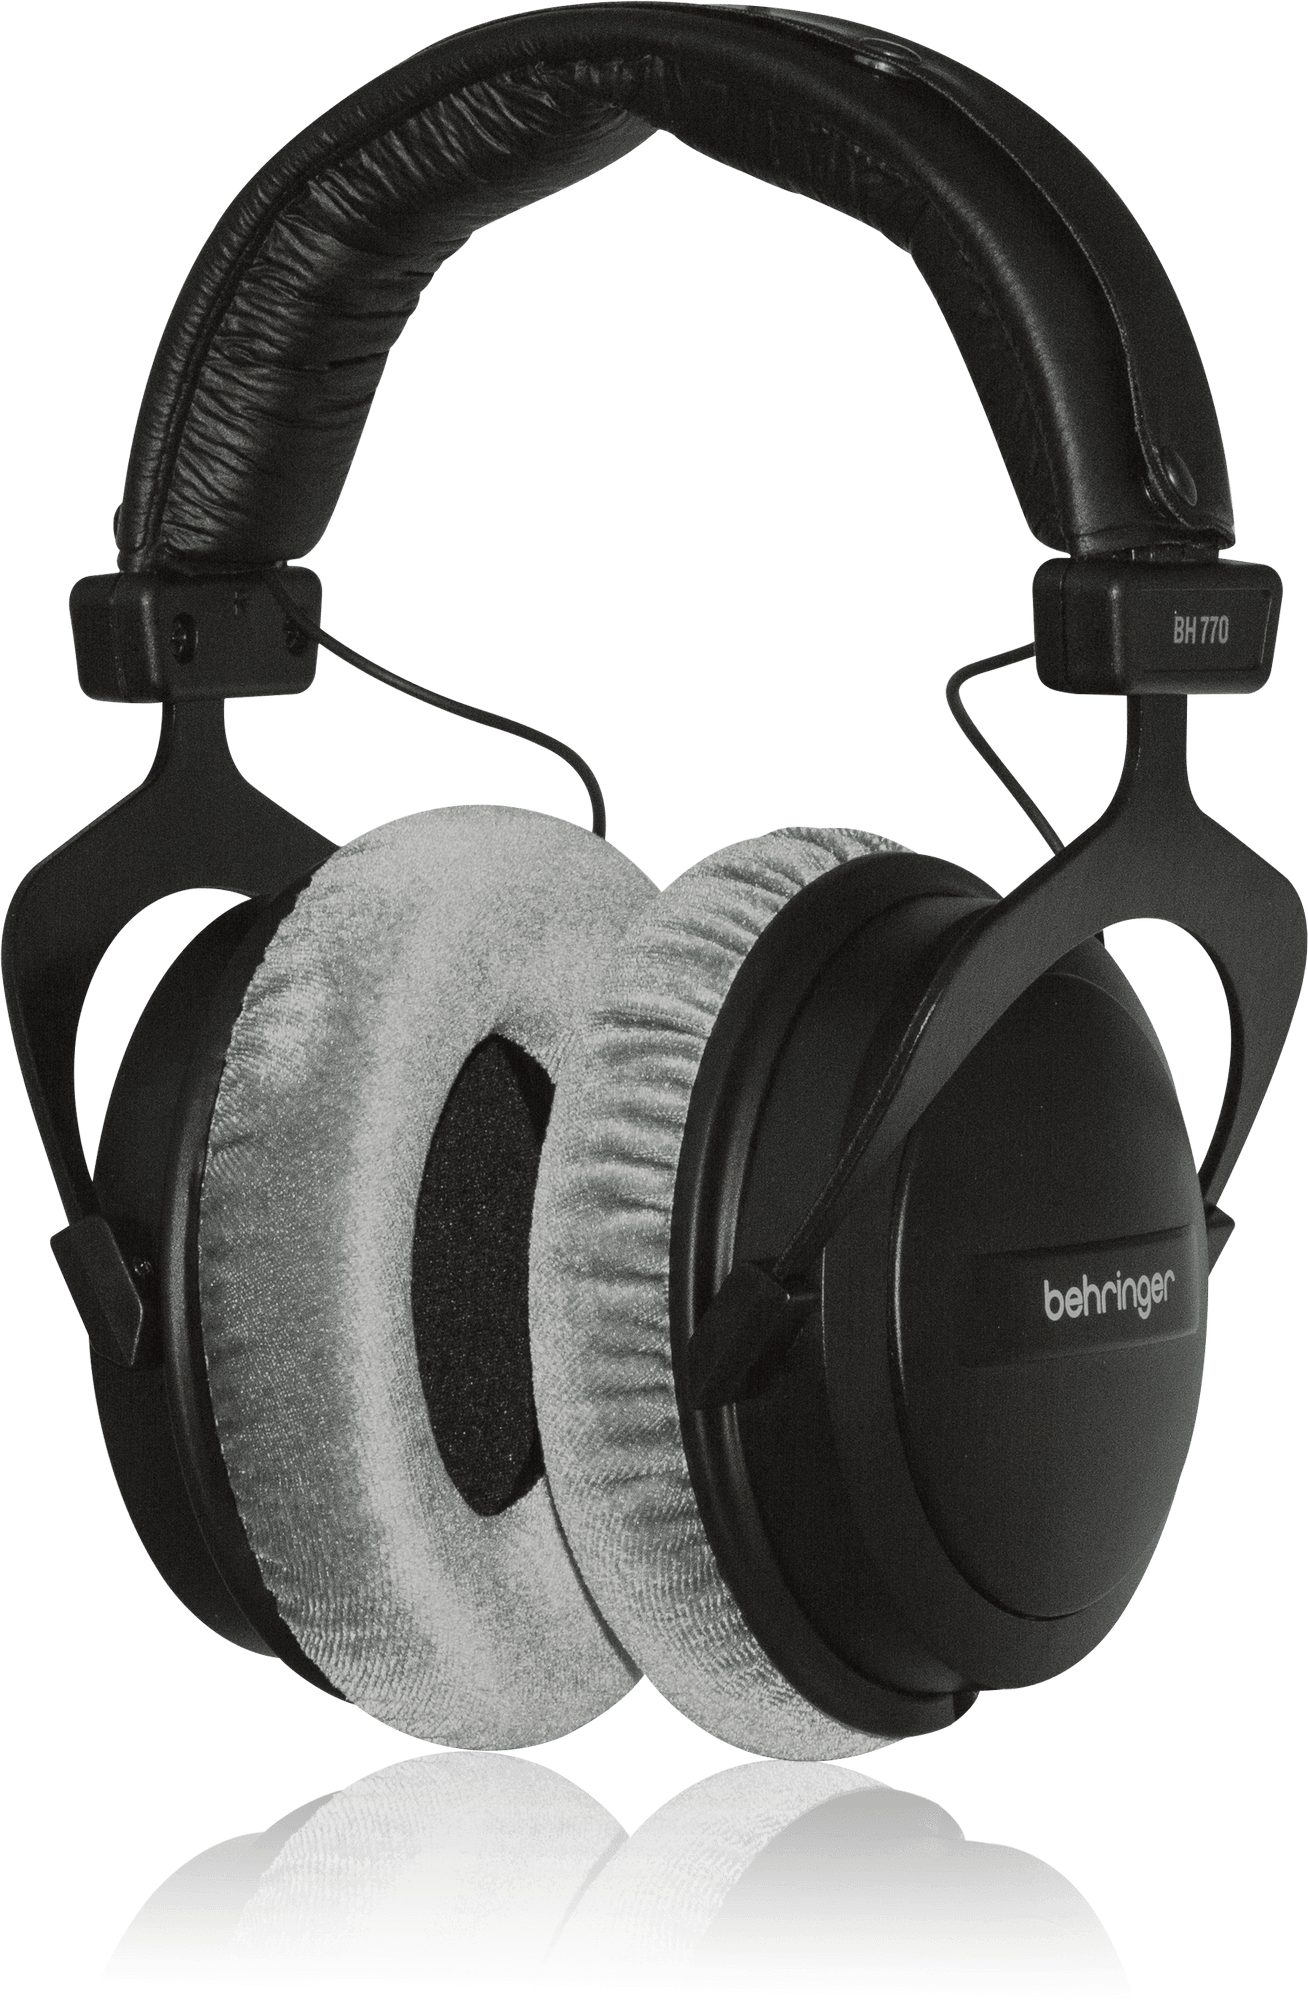 Behringer BH770 Closed-Back Studio Reference Headphones with Extended Bass Response (BH 770 / BH-770) | BEHRINGER , Zoso Music